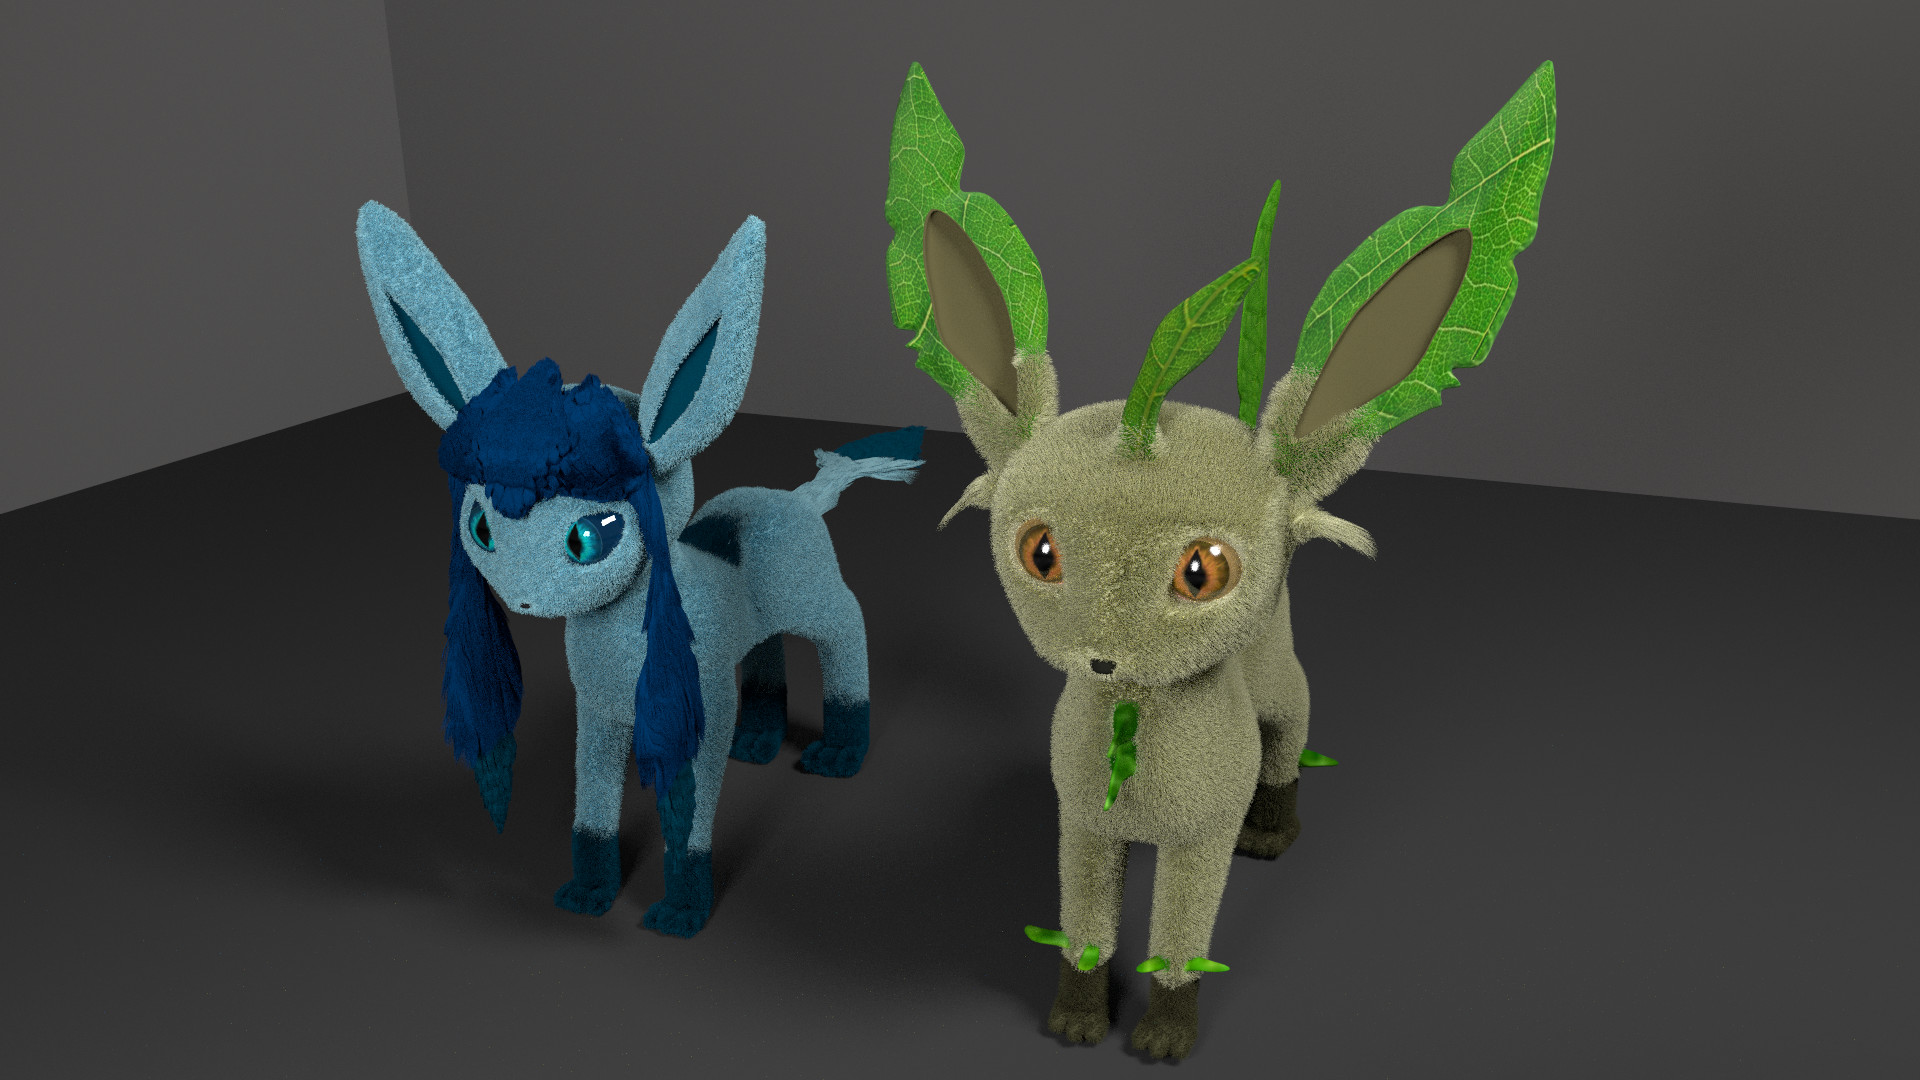 1920x1080 Leafeon and Glaceon 3D by alewism Leafeon and Glaceon 3D by alewism